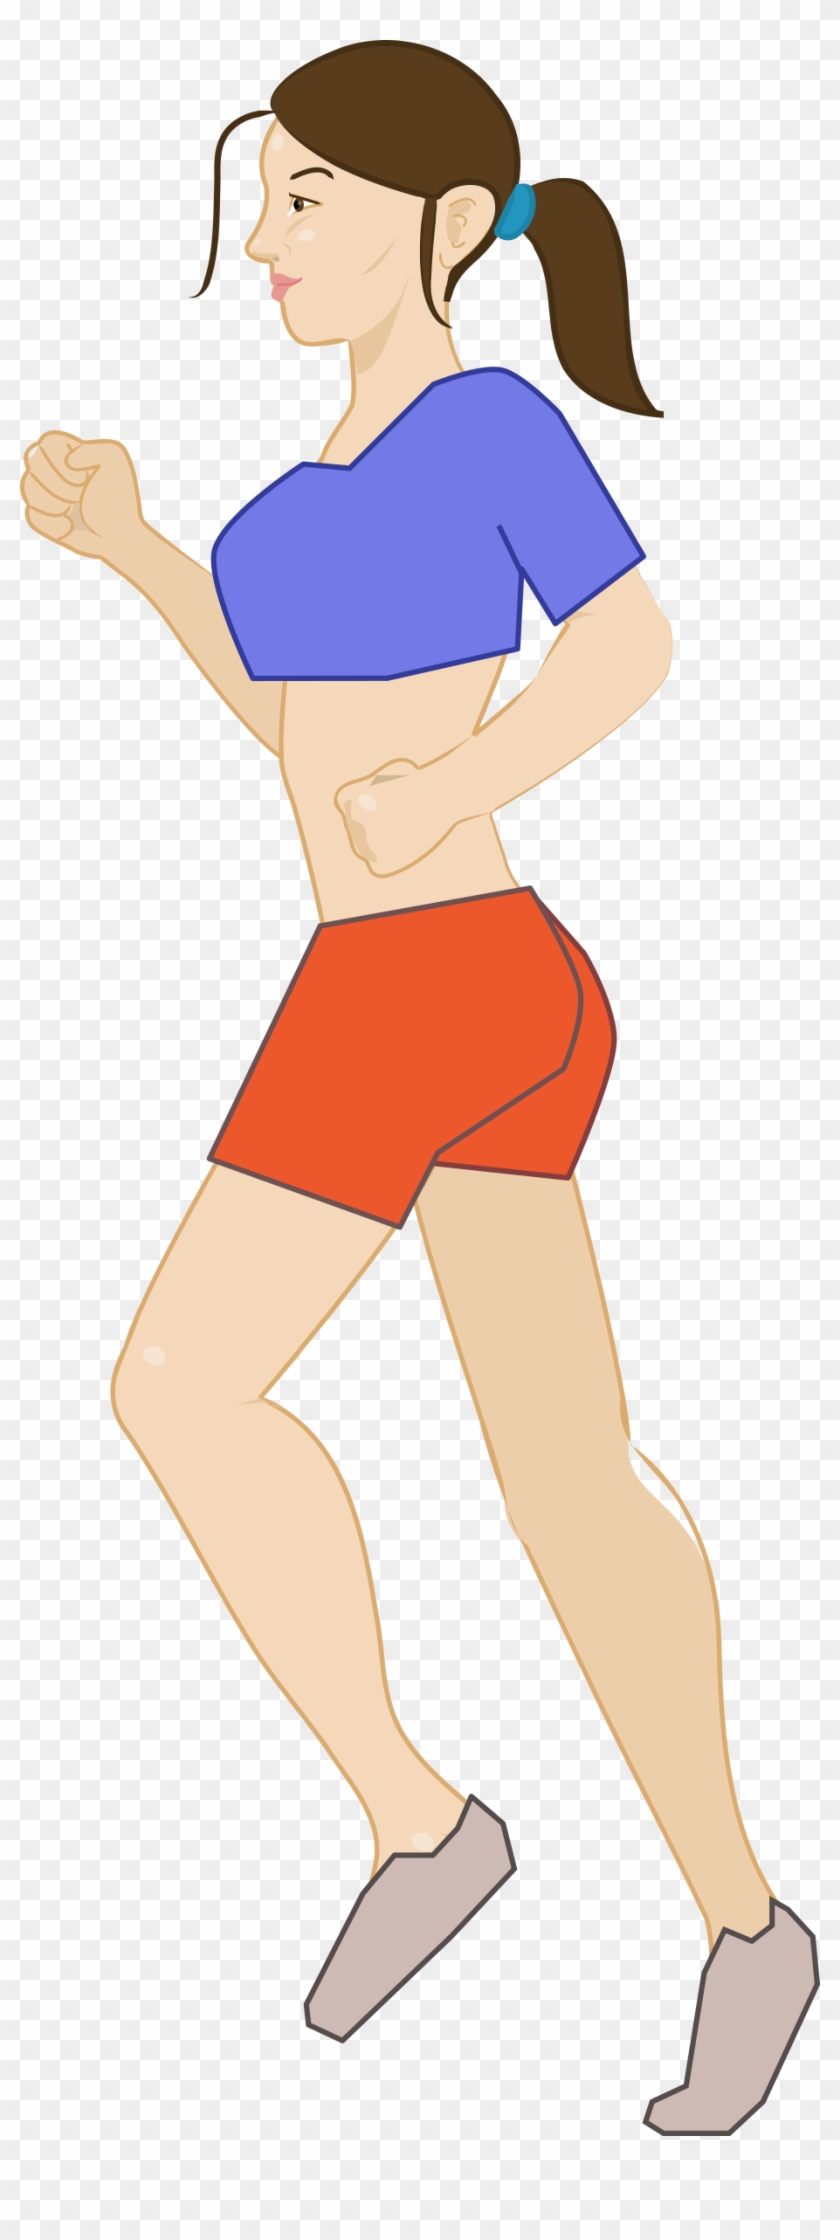 This Free Icons Png Design Of Jogging Woman - Joggen Png #274199